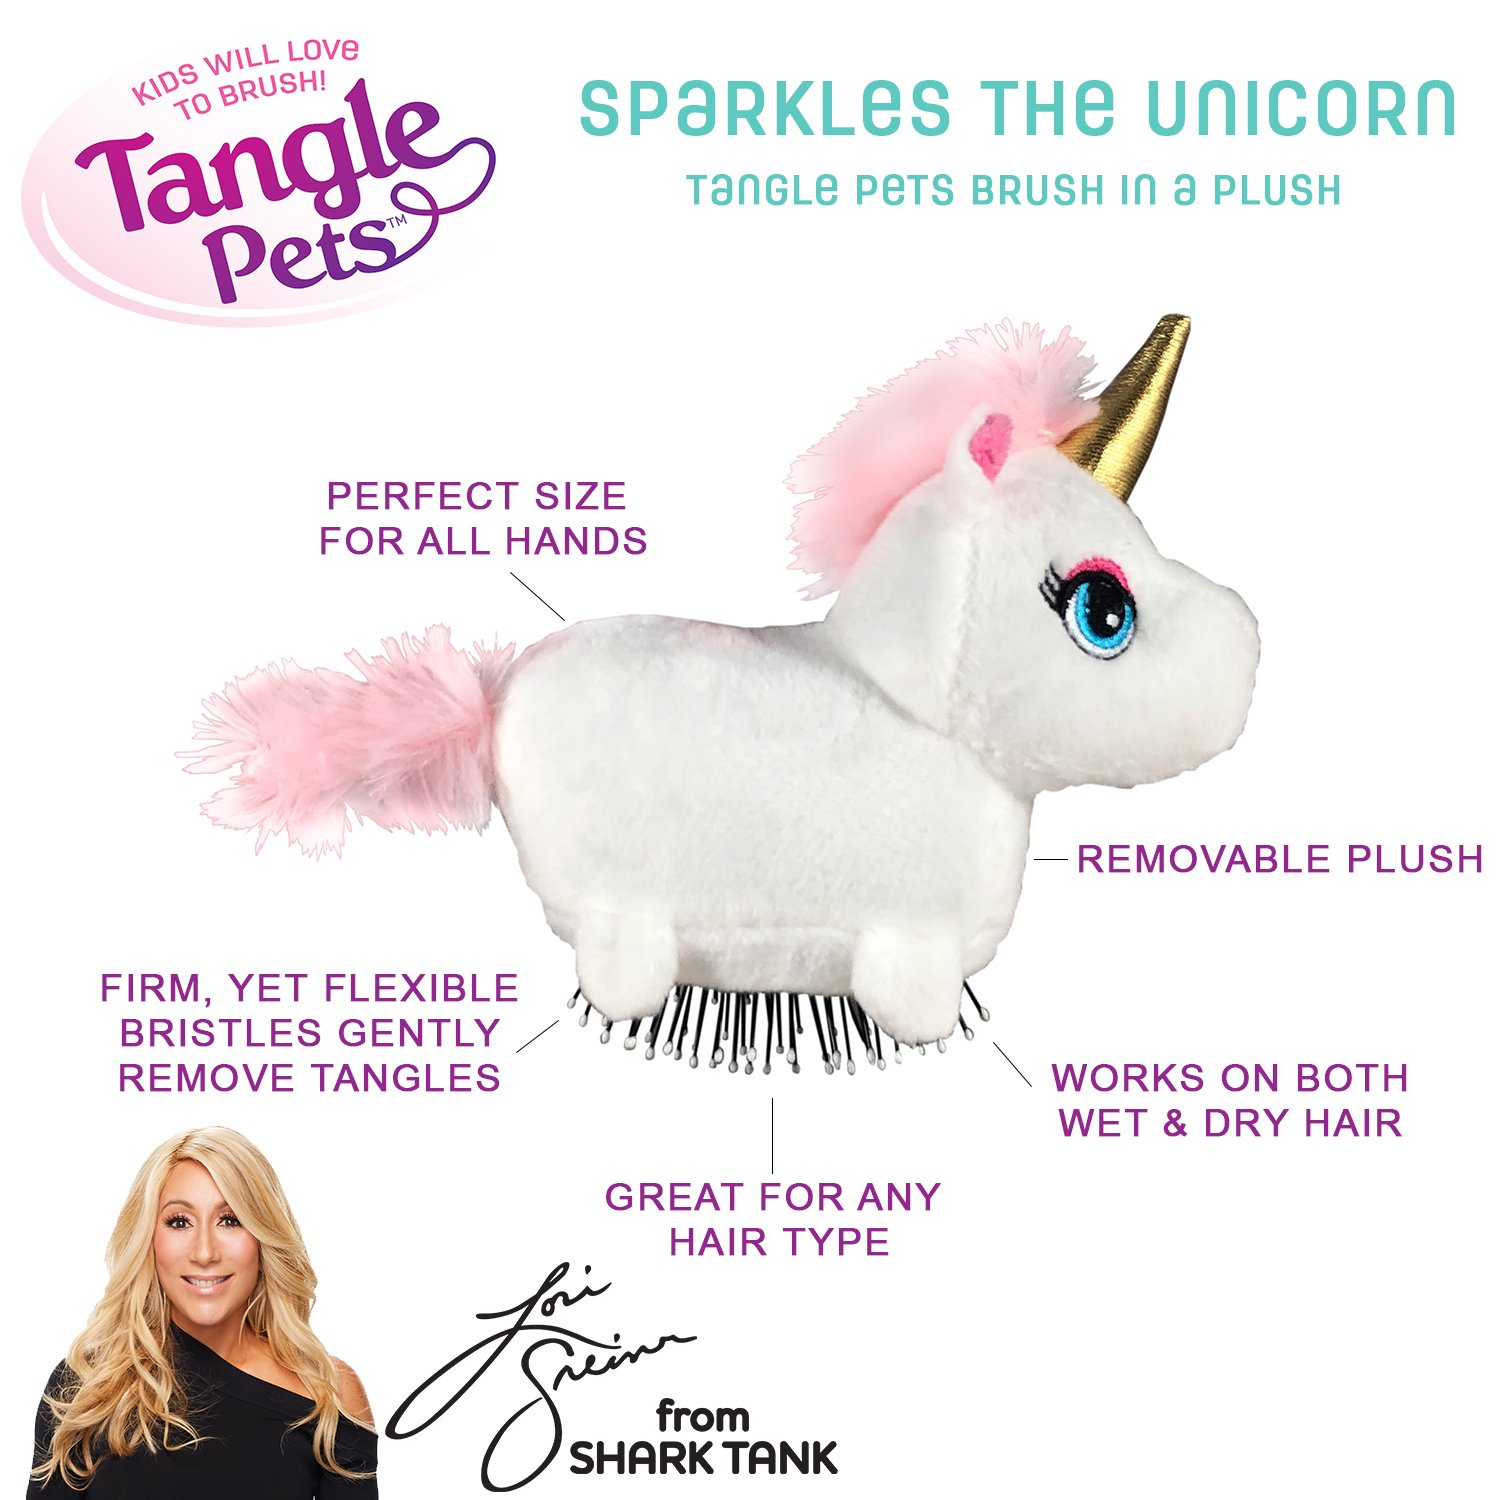 Tangle Pets SPARKLES THE UNICORN- The Detangling Brush in a Plush, Great for Any Hair Type, Removable Plush, As Seen on Shark Tank